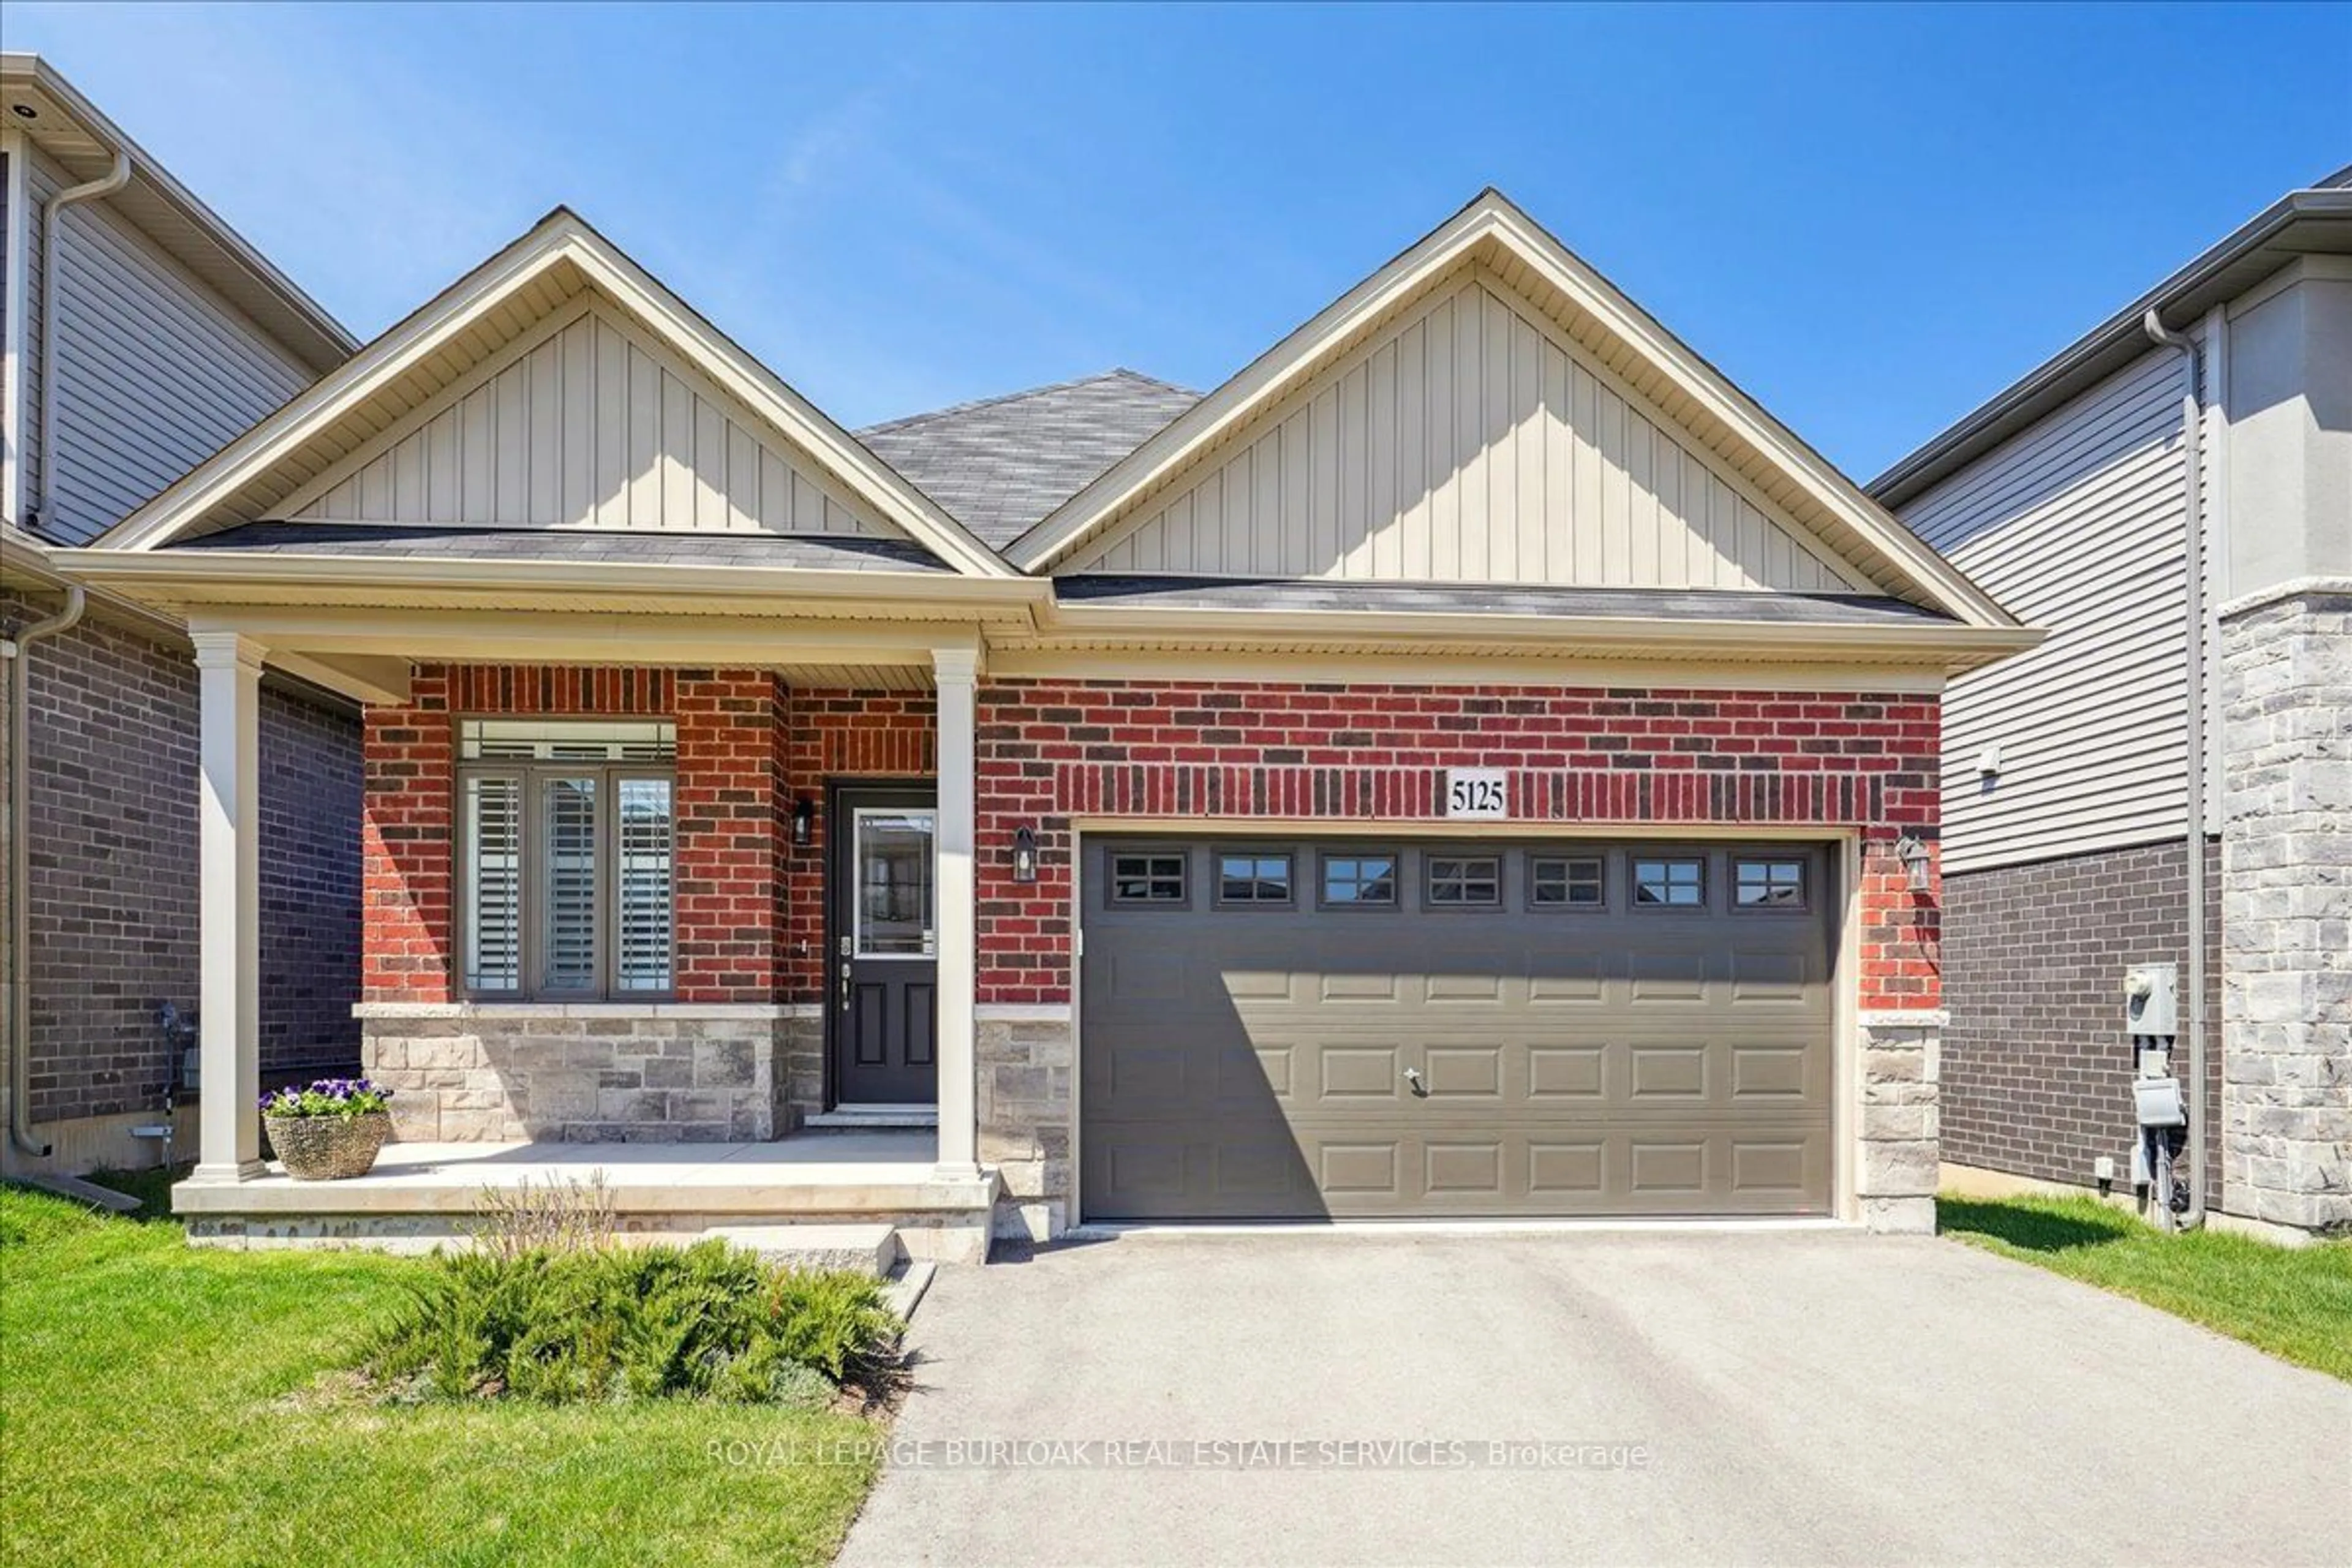 Home with brick exterior material for 5125 Rose Ave, Lincoln Ontario L3J 0K1